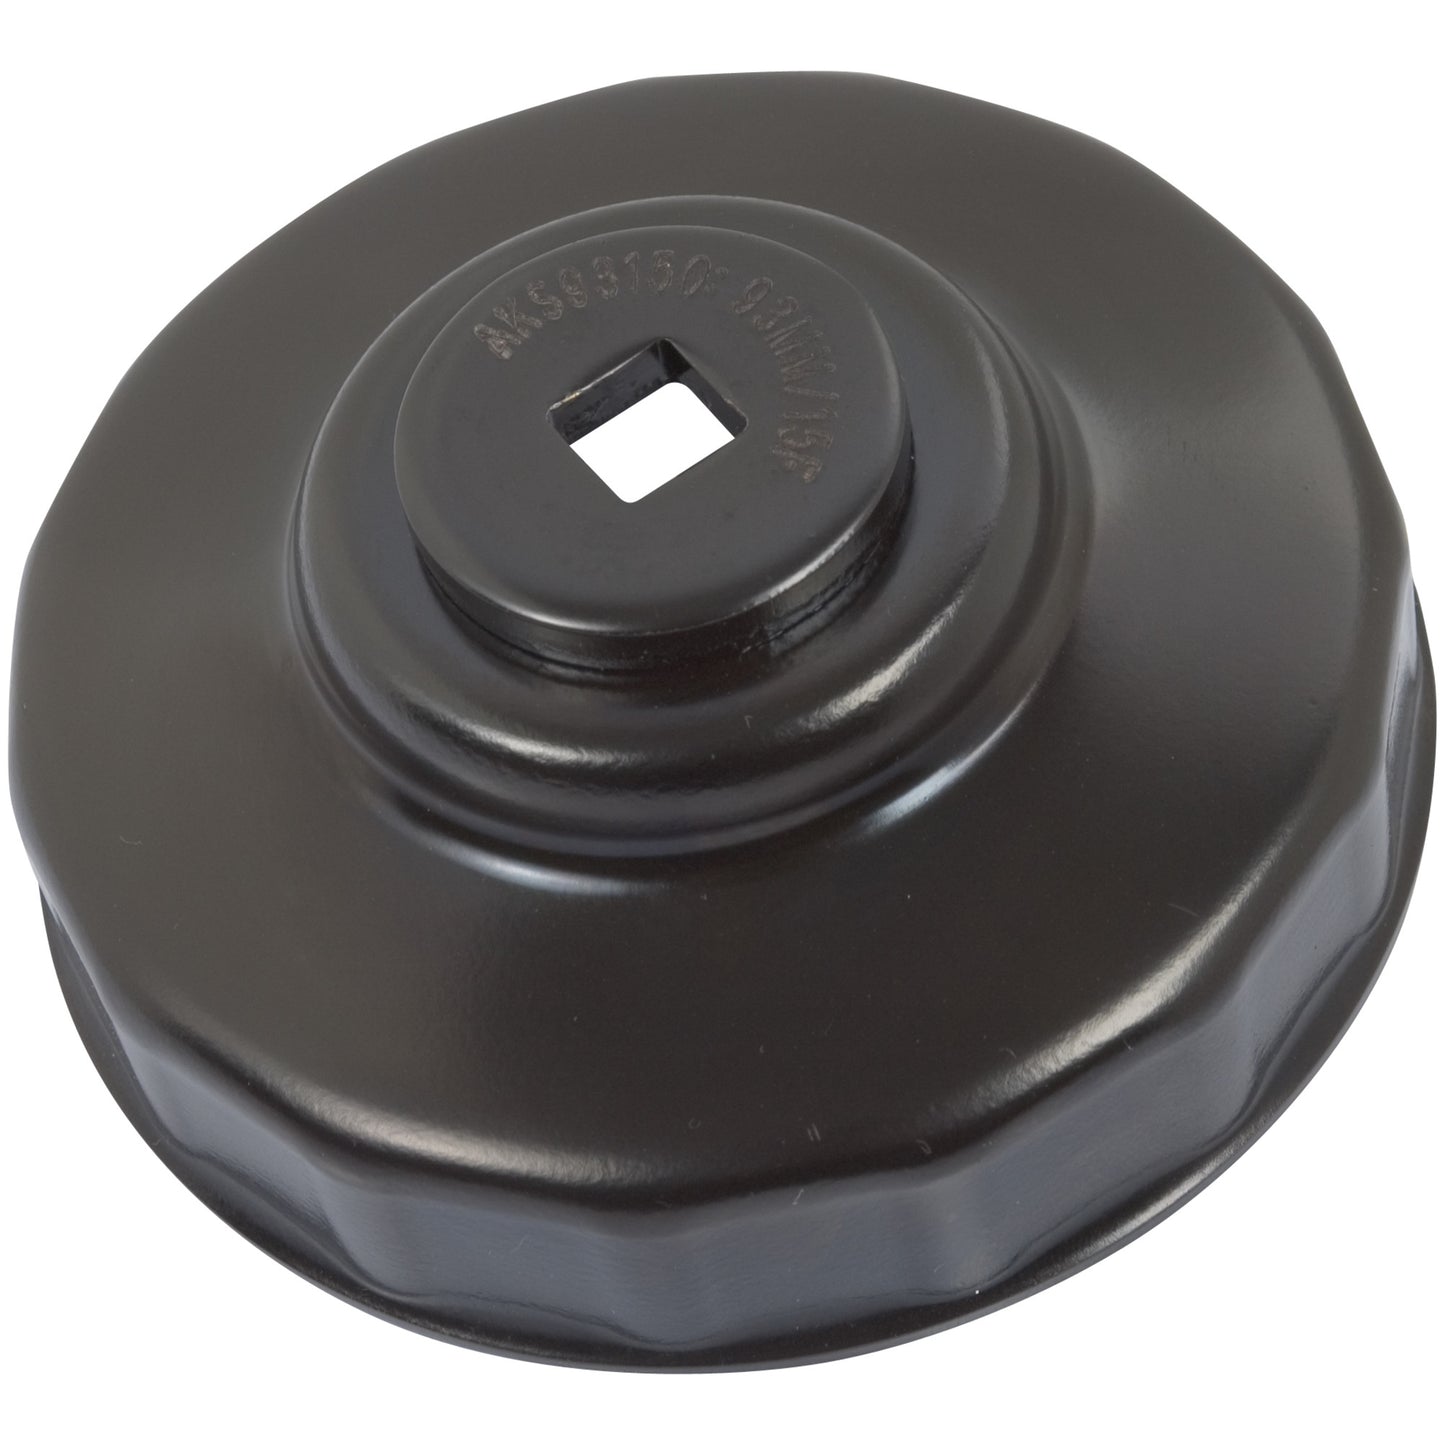 Oil Filter Cap Wrench 75mm x 15 Flute